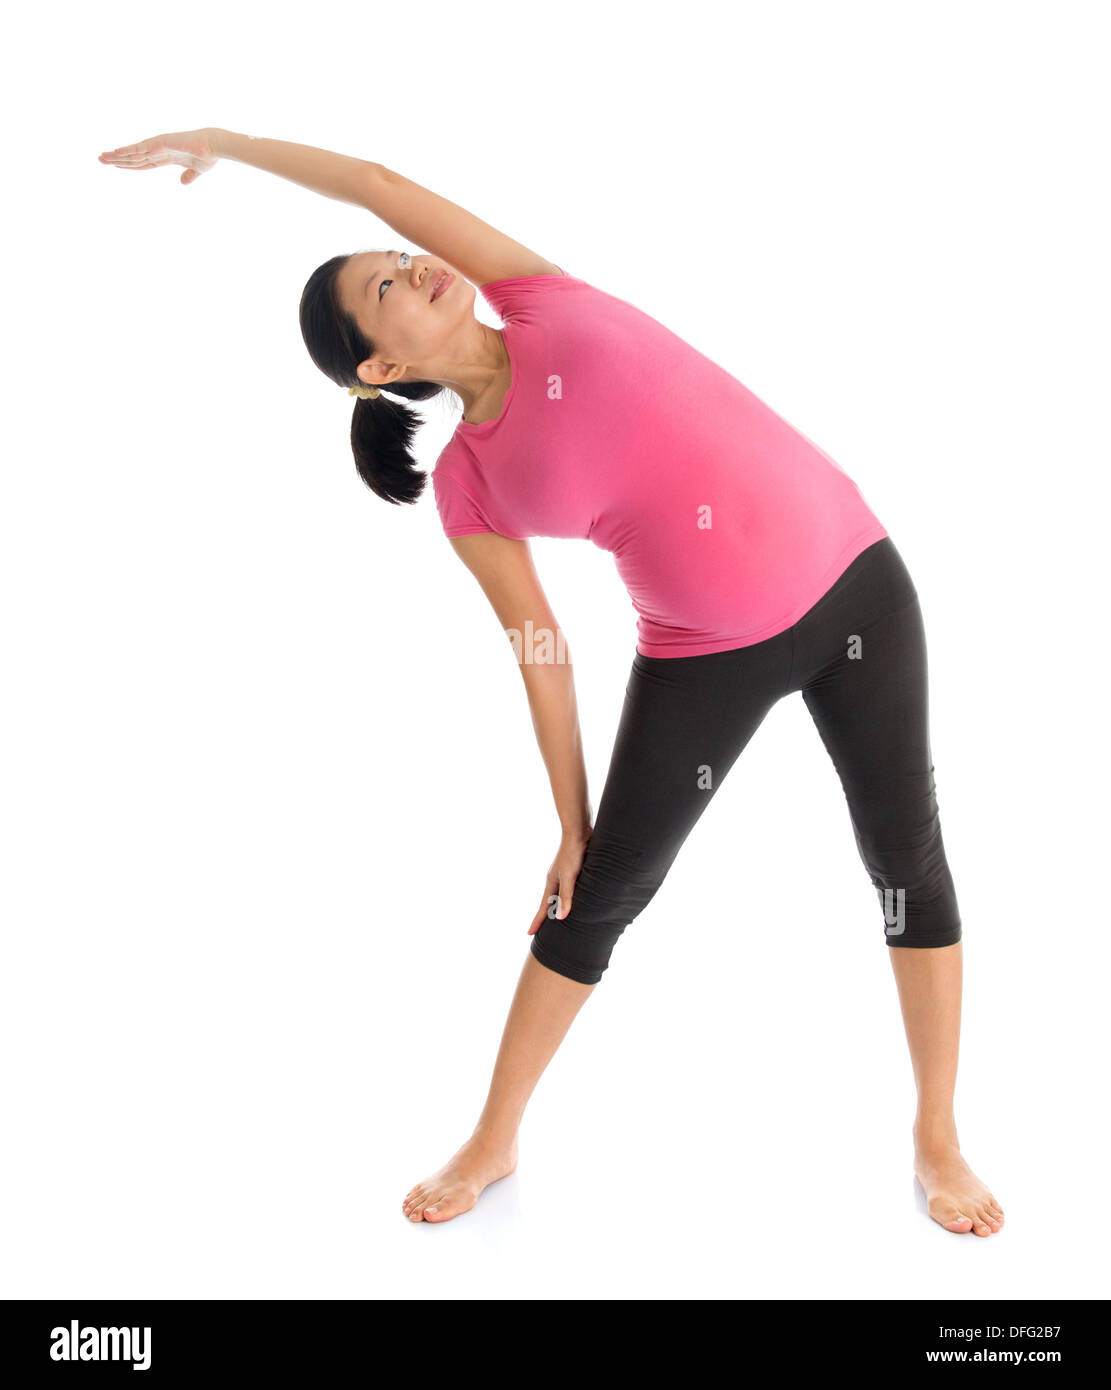 Excited Model Standing Side Stretch in the Gym Stock Image - Image of club,  physical: 83493497